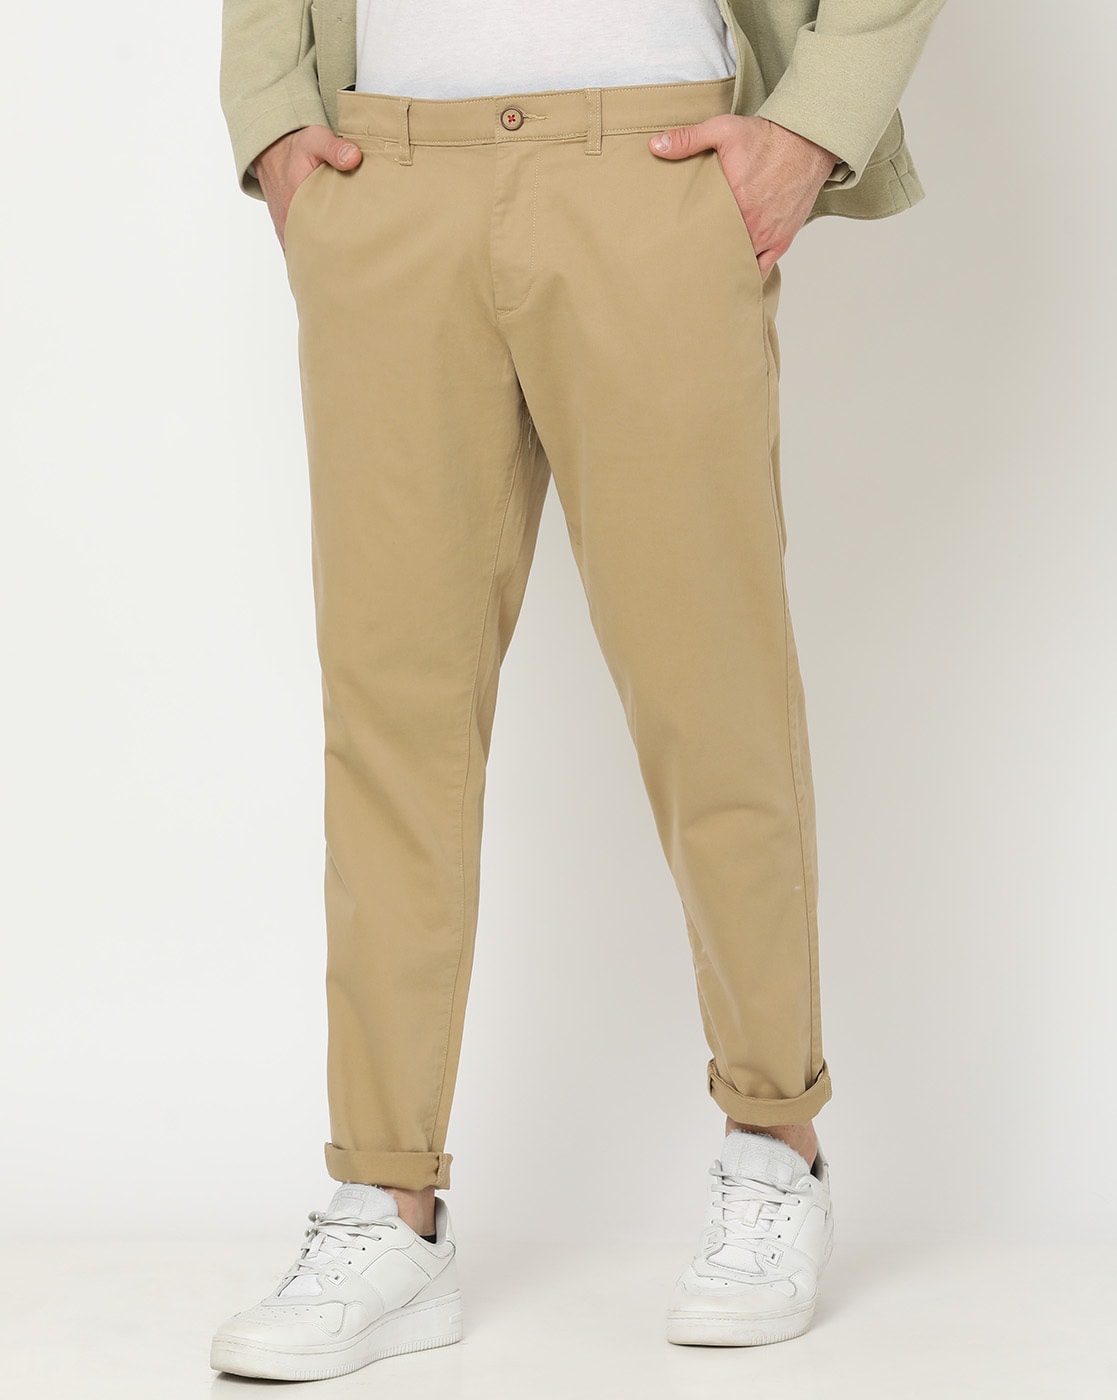 WS's Mens Straight Fit Casual Trousers Combo Khaki/Beige Color (Pack of 2)